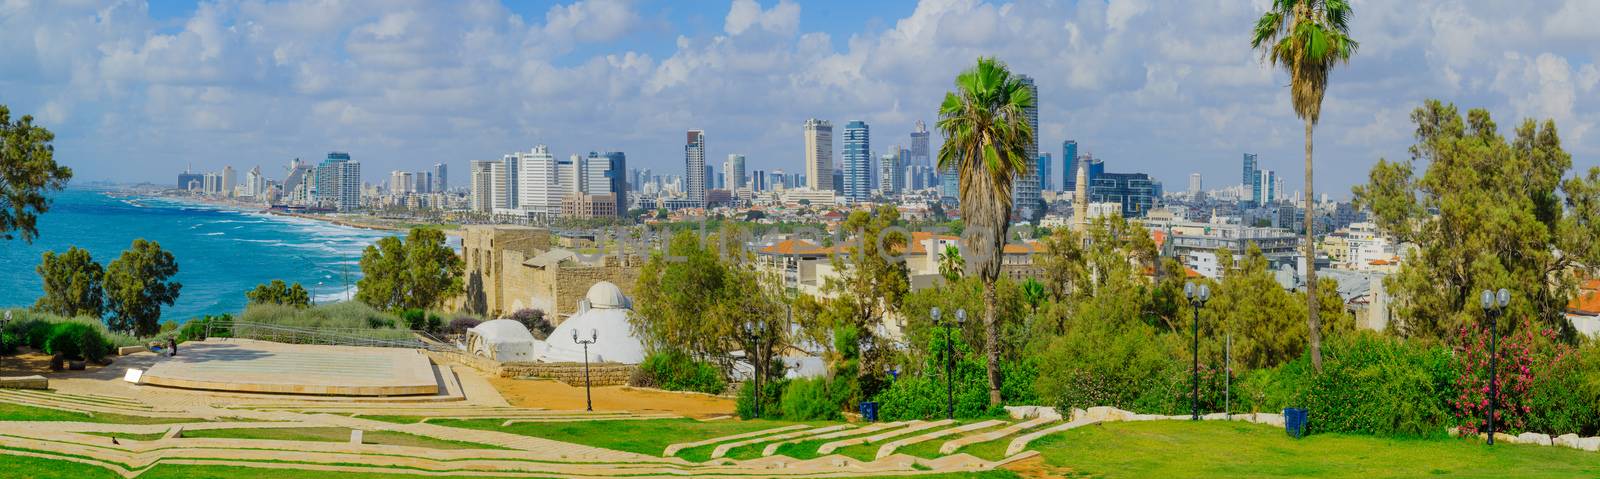 TEL-AVIV, ISRAEL - MAY 27, 2016: Panoramic view of the coast and skyline of Tel-Aviv, as viewed from Jaffa, with locals and visitors, in Tel-Aviv Yafo, Israel